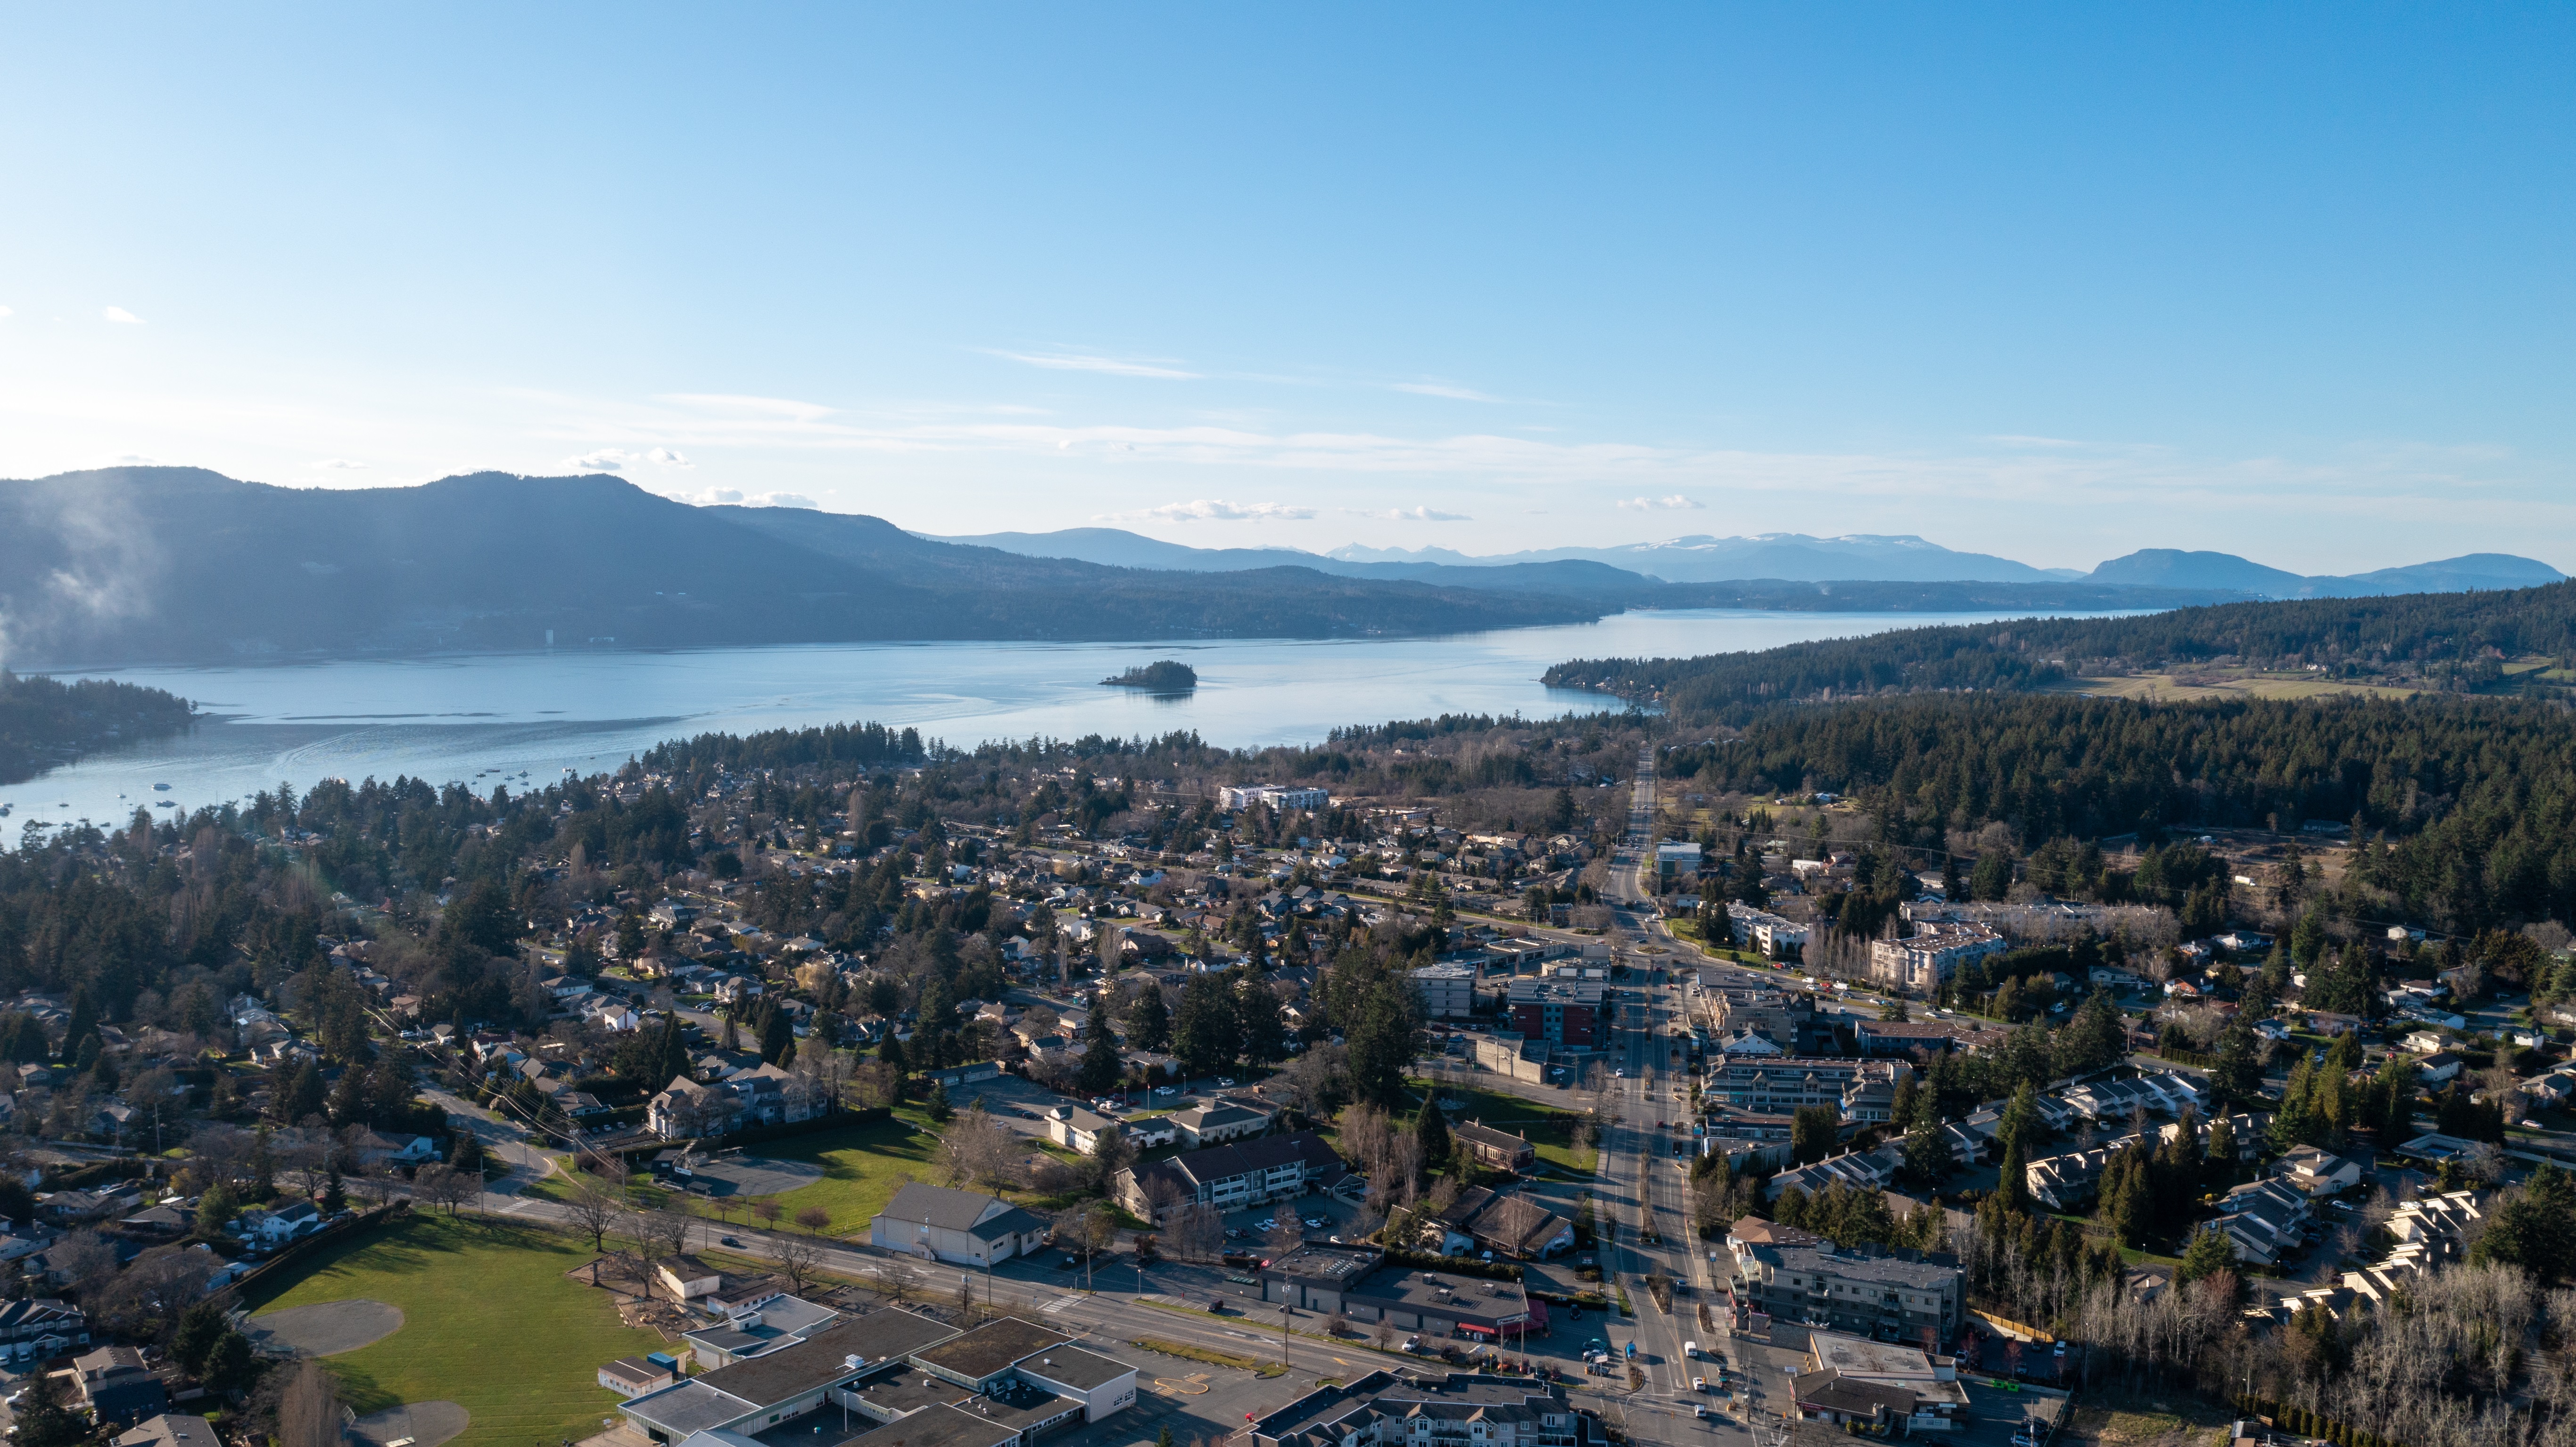 An image of Brentwood bay in the District of Central Saanich